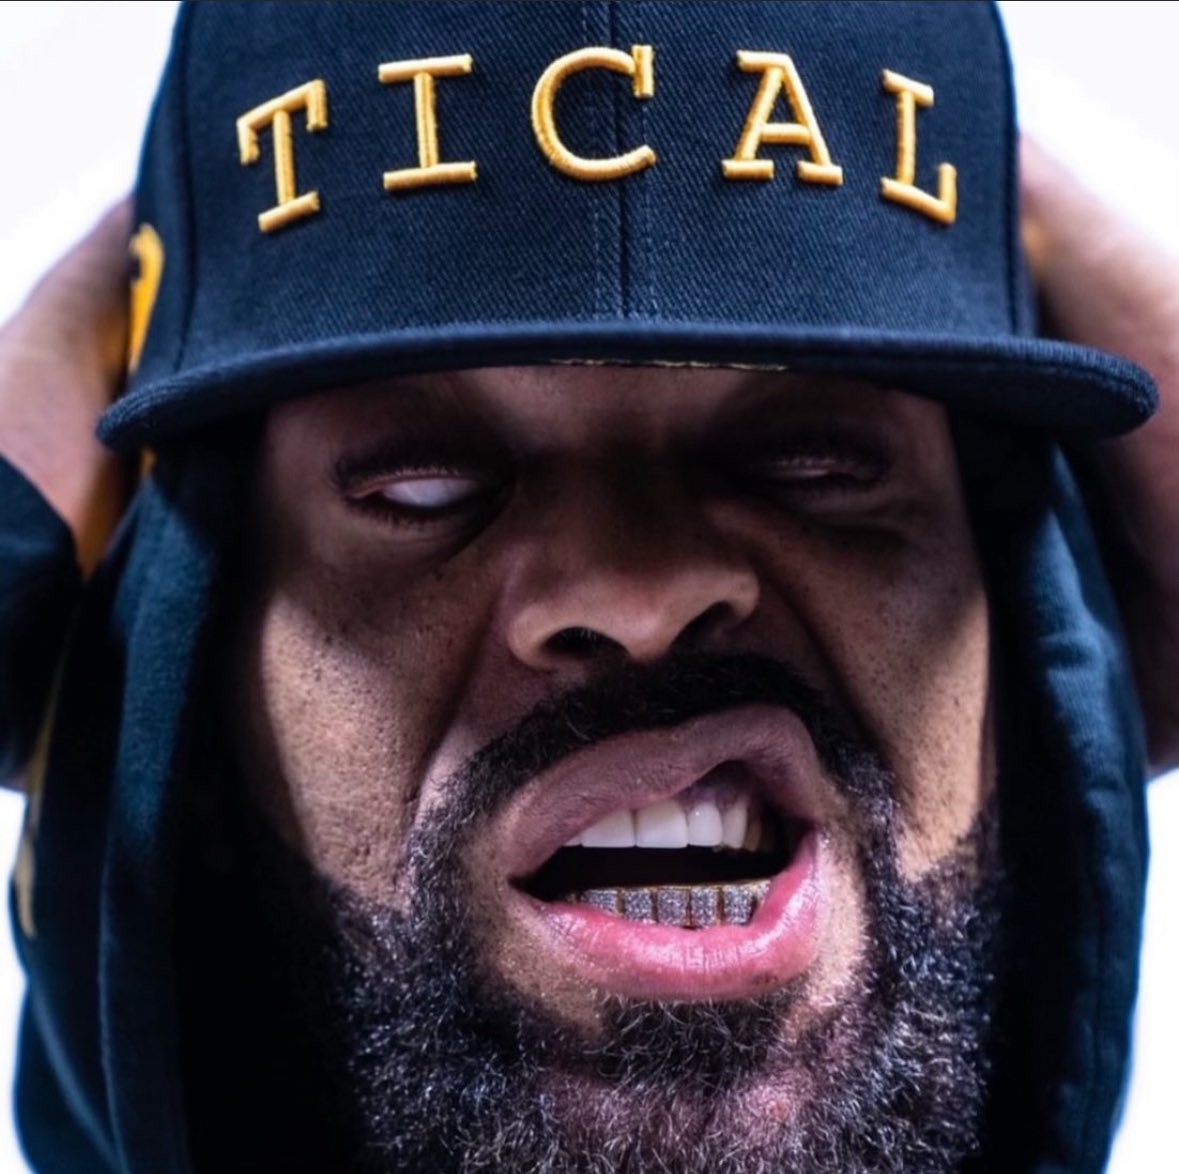 📢🌿🎤Join us for TICAL Tuesday, Purests! Buy one @ticalofficial cannabis 1/8th, get one for 5⃣0⃣% off! #Denver #dispensary #cannabis #MethodMan #BlackOwned #WomanOwned #VeteranOwned #cannabisindustry #HipHopCulture #IAmAPurest💚